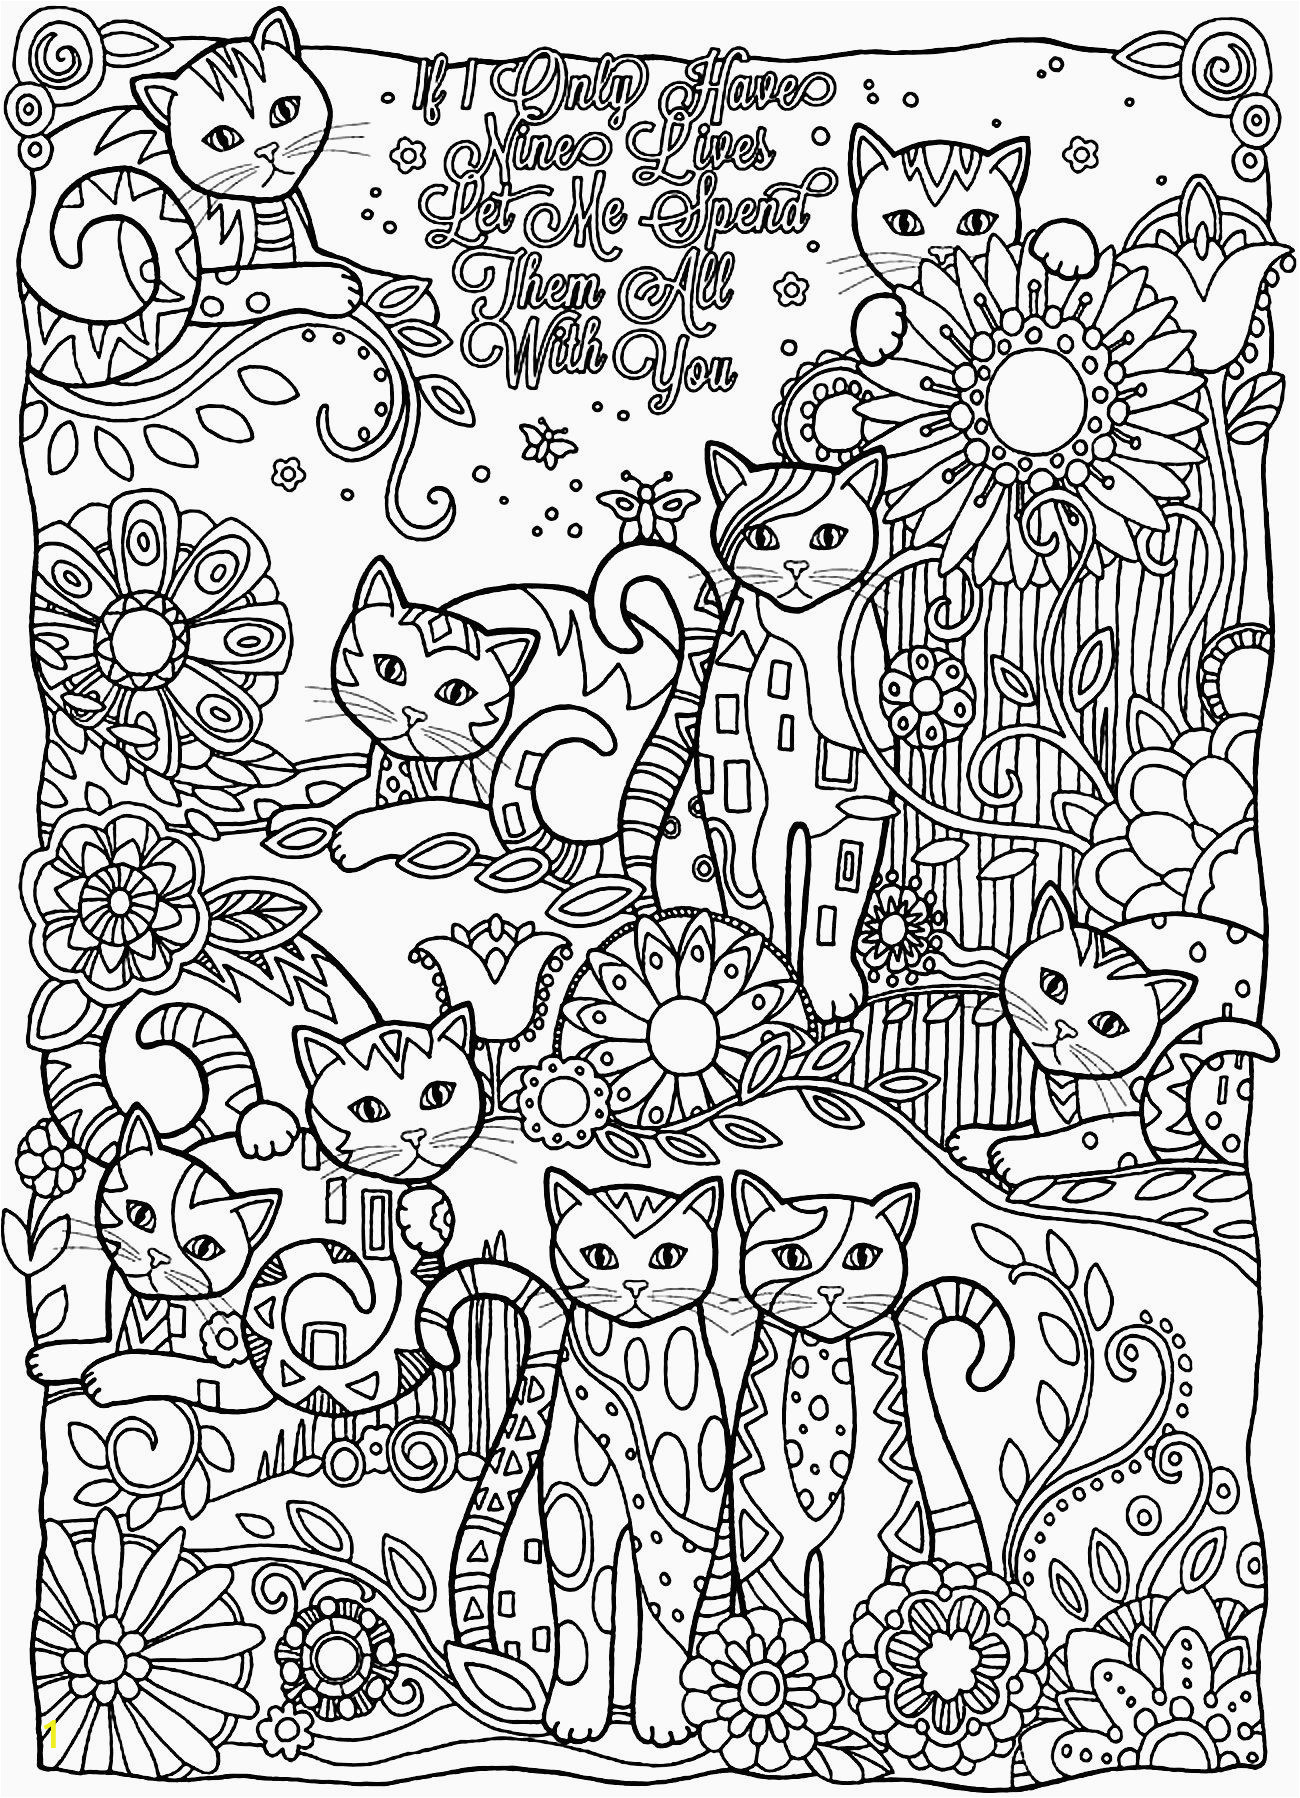 Kawaii Printable Coloring Pages Pin On Christmas Coloring Pages